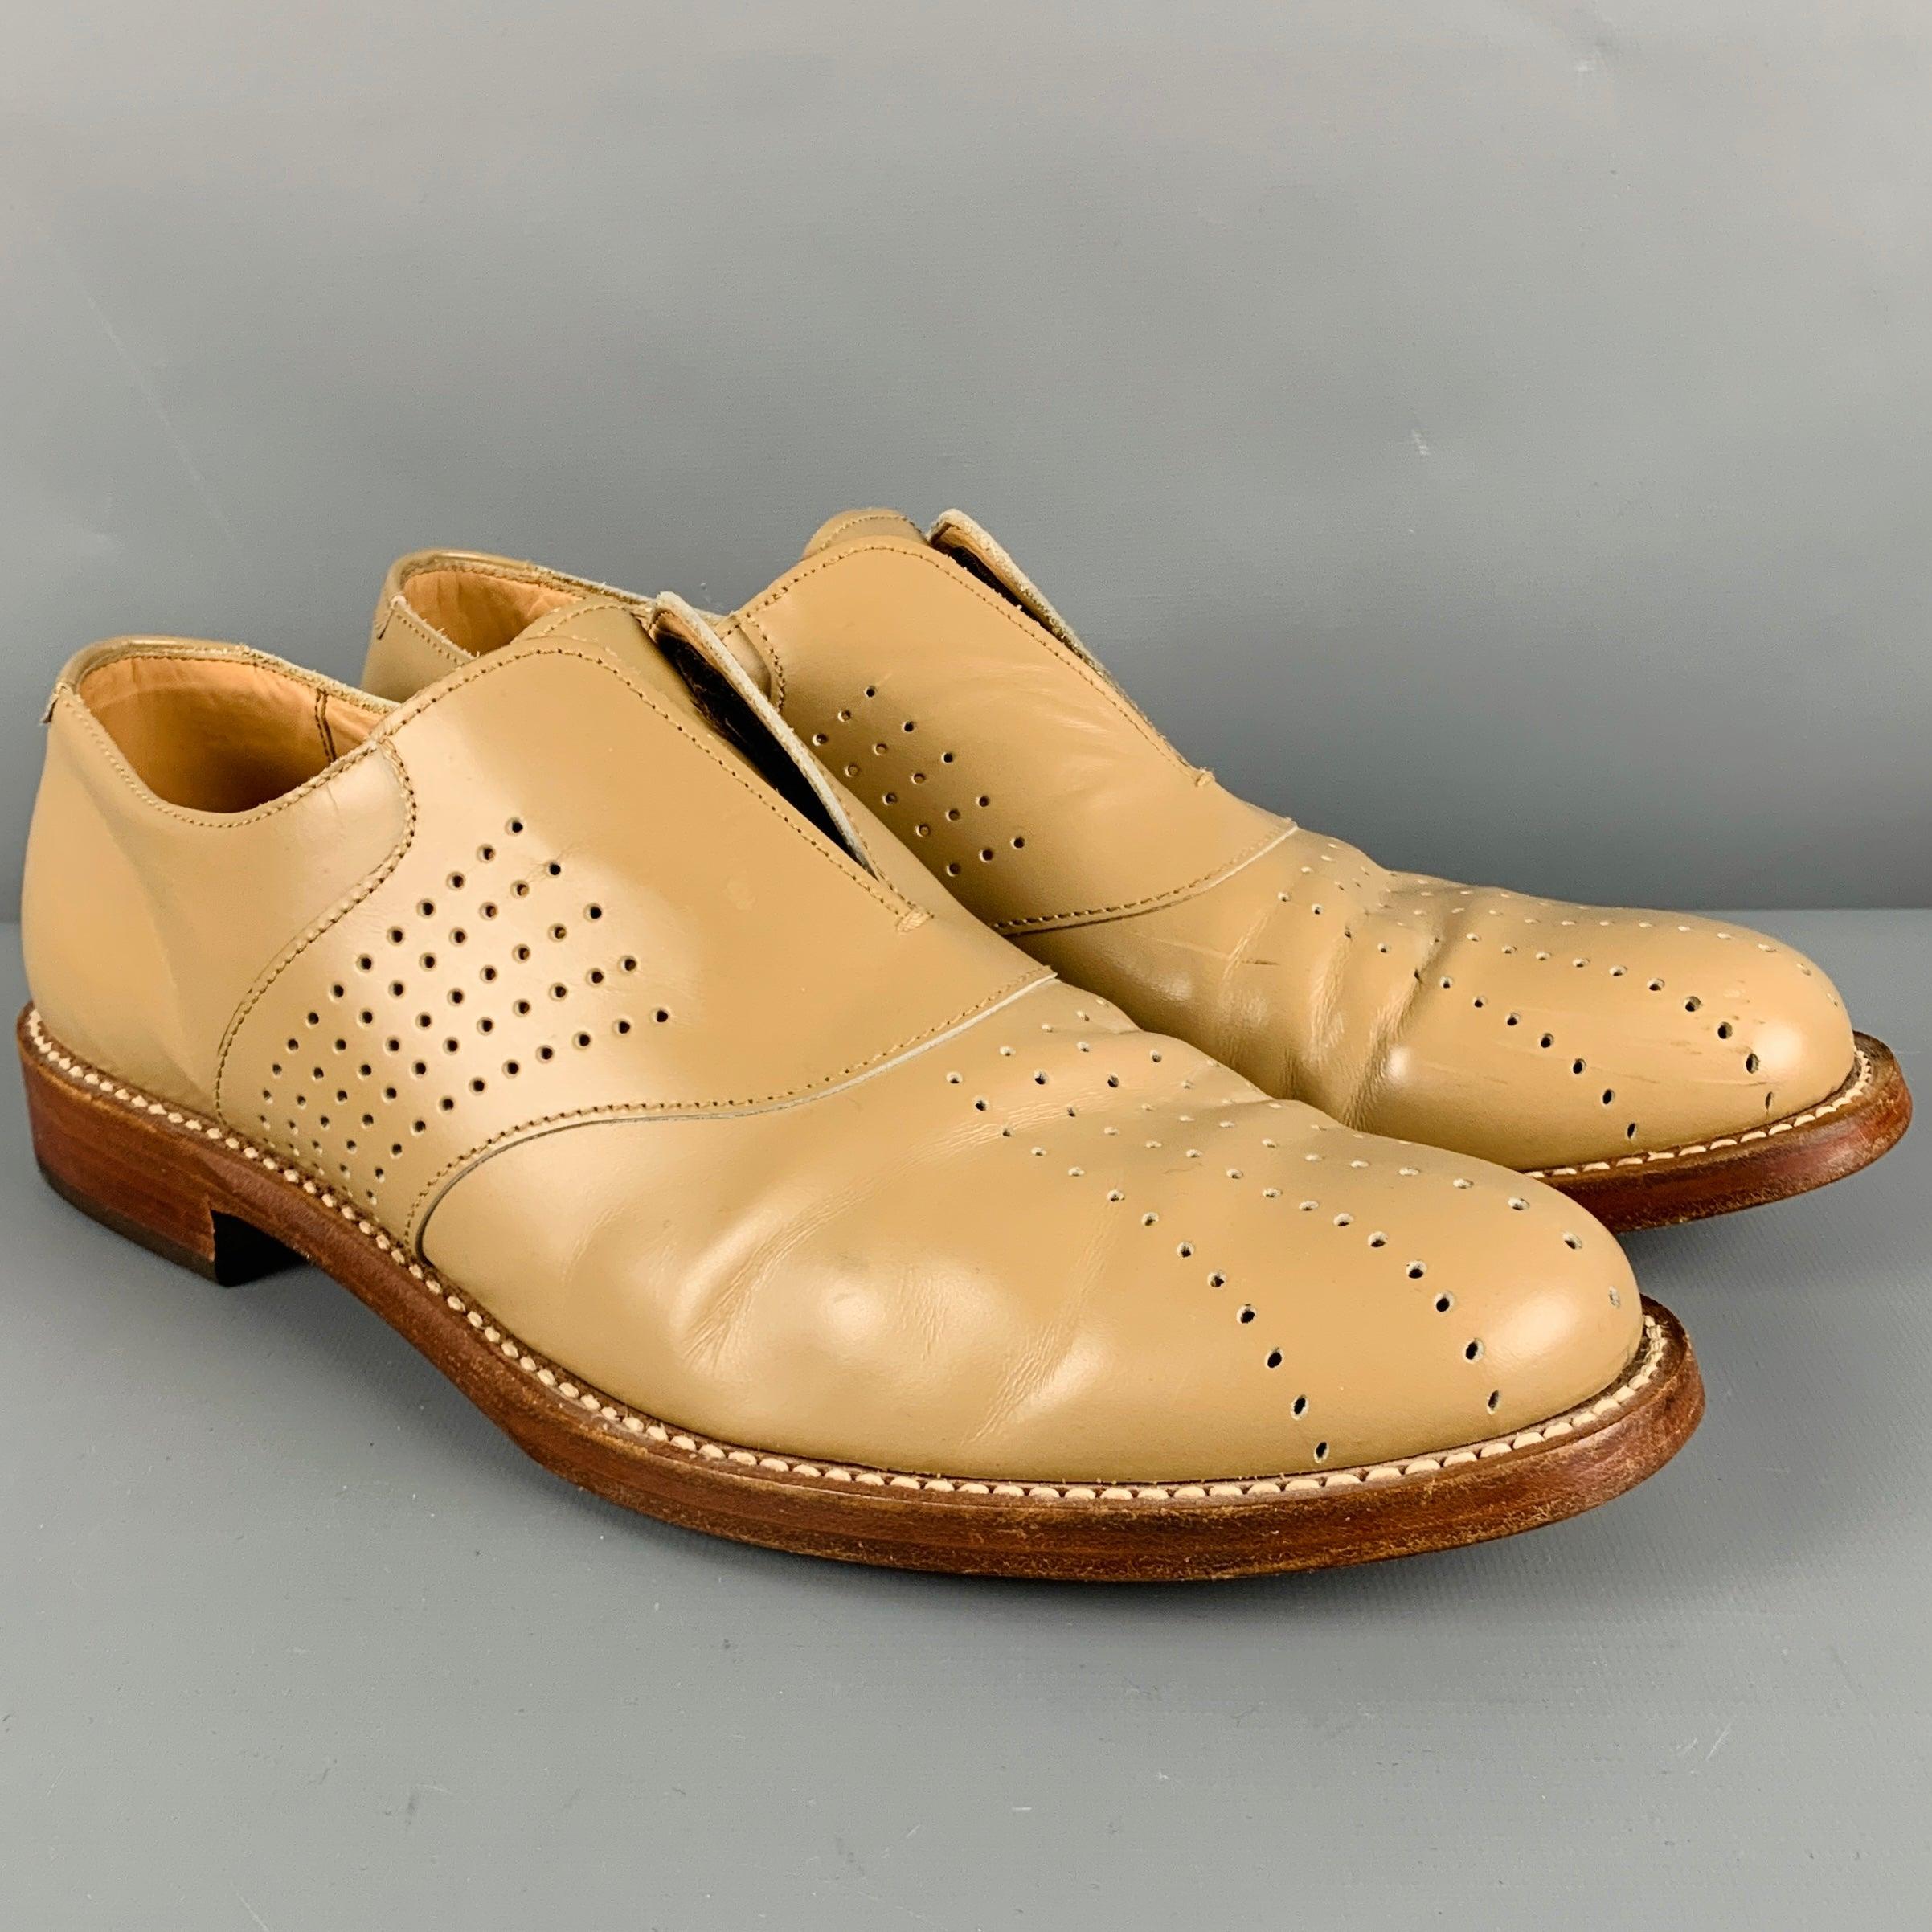 JIL SANDER loafers
in a beige leather fabric featuring a perforated style, self-fastening tongue, and slip on closure. Made in Italy.Very Good Pre-Owned Condition. Minor scuff marks. 

Marked:   2 JUP 026 8.5Outsole: 12 inches  x 4.5 inches 
  
  
